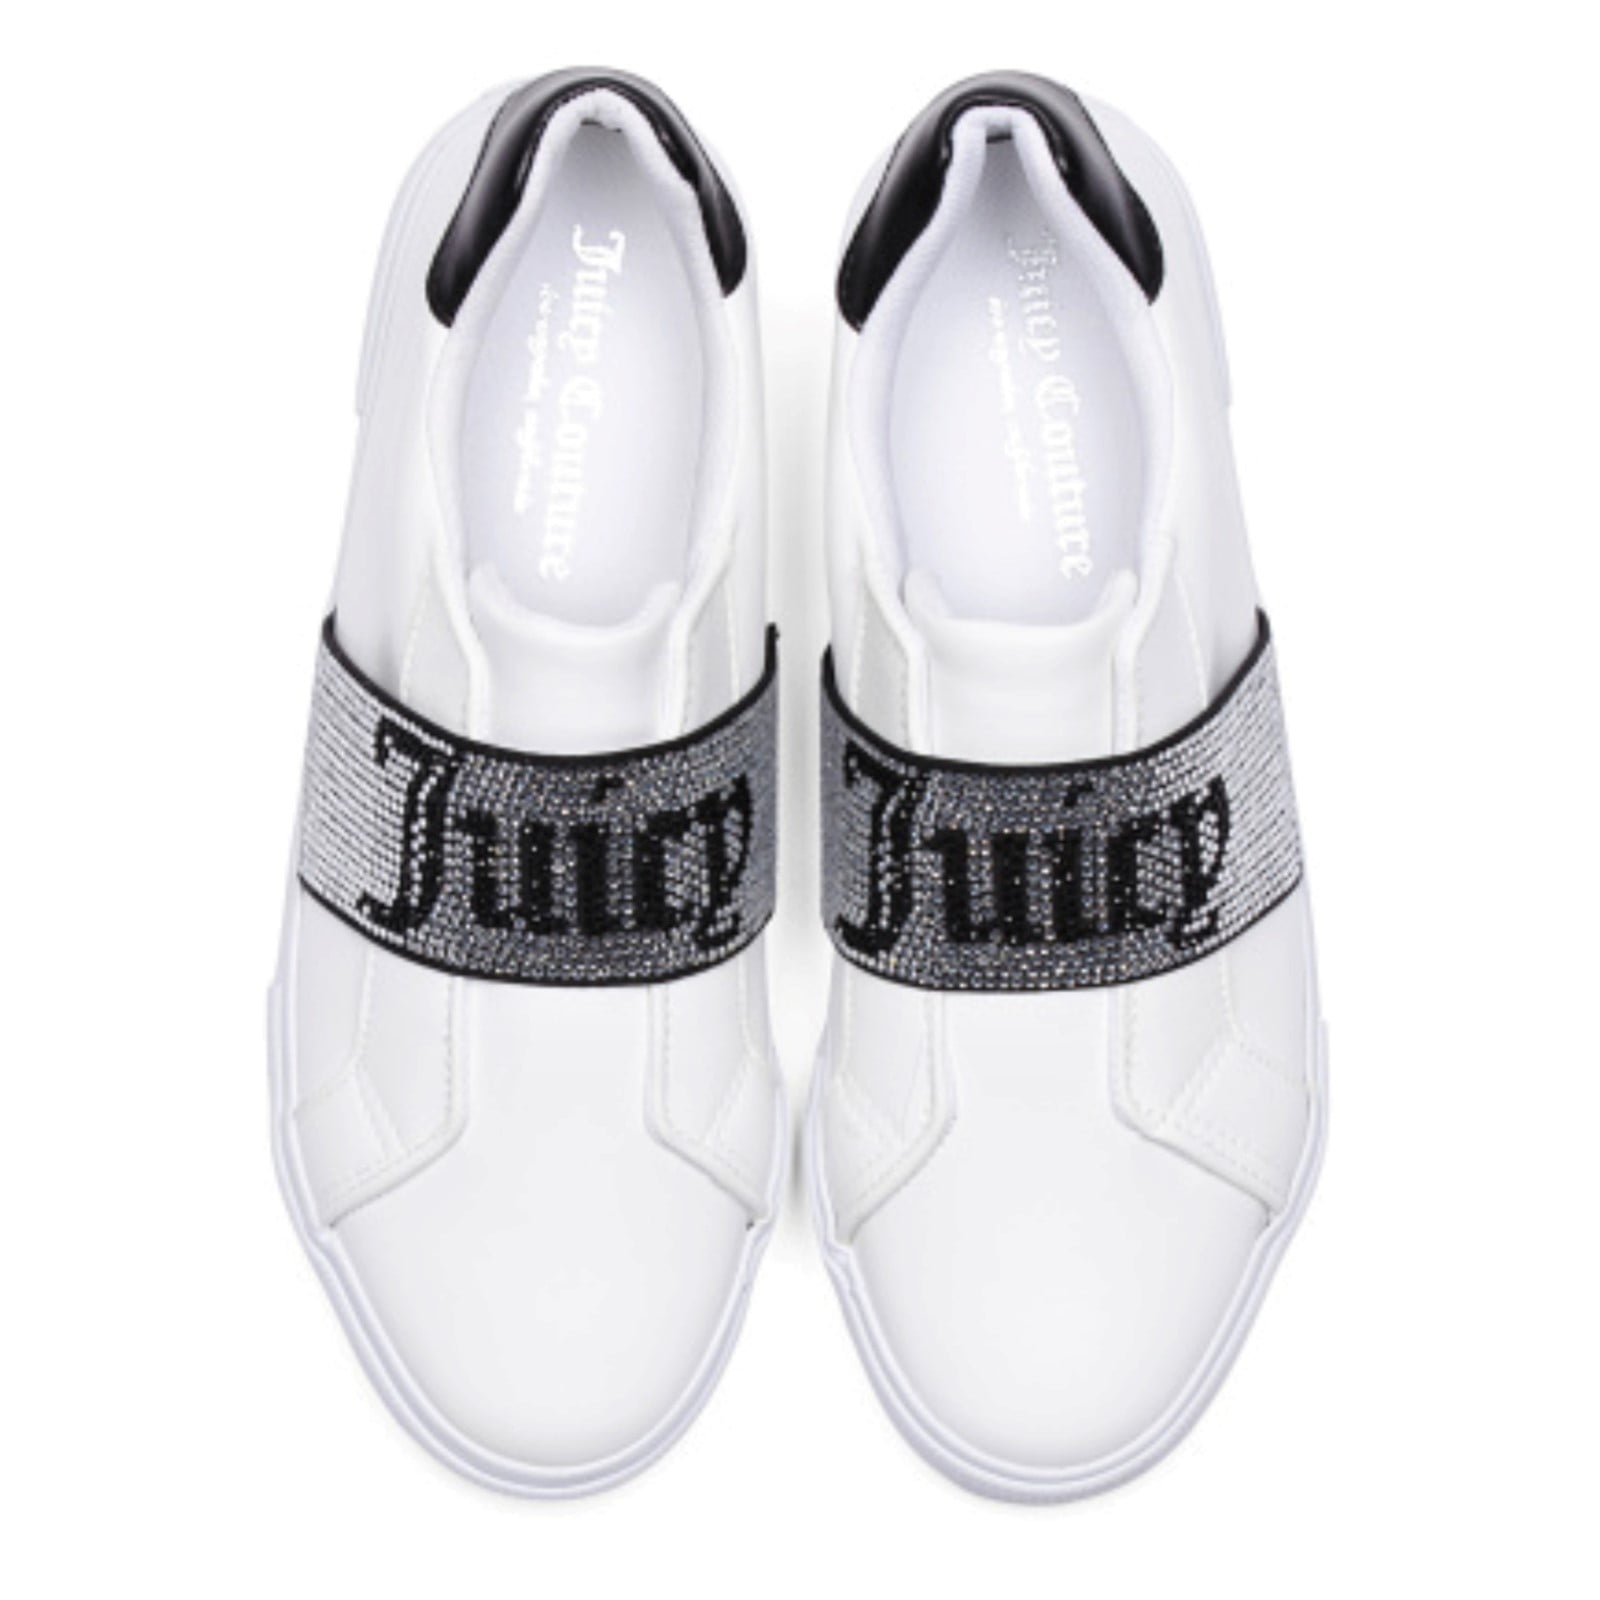 Juicy Couture Joanz Wedge Sneakers for Women, India | Ubuy